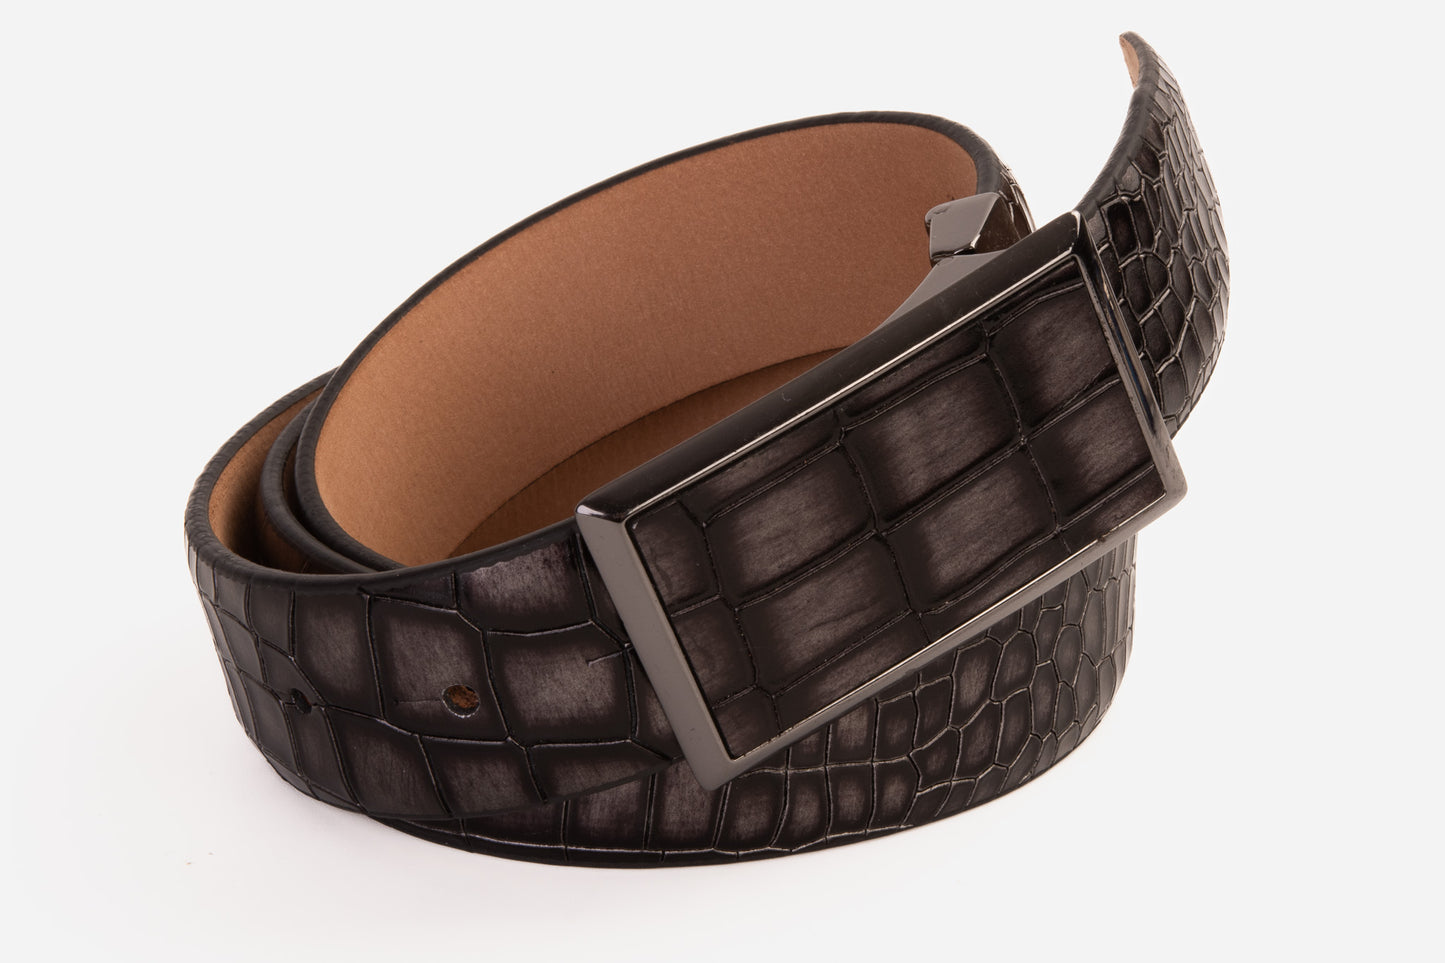 The Mississippi Gray Leather Belt